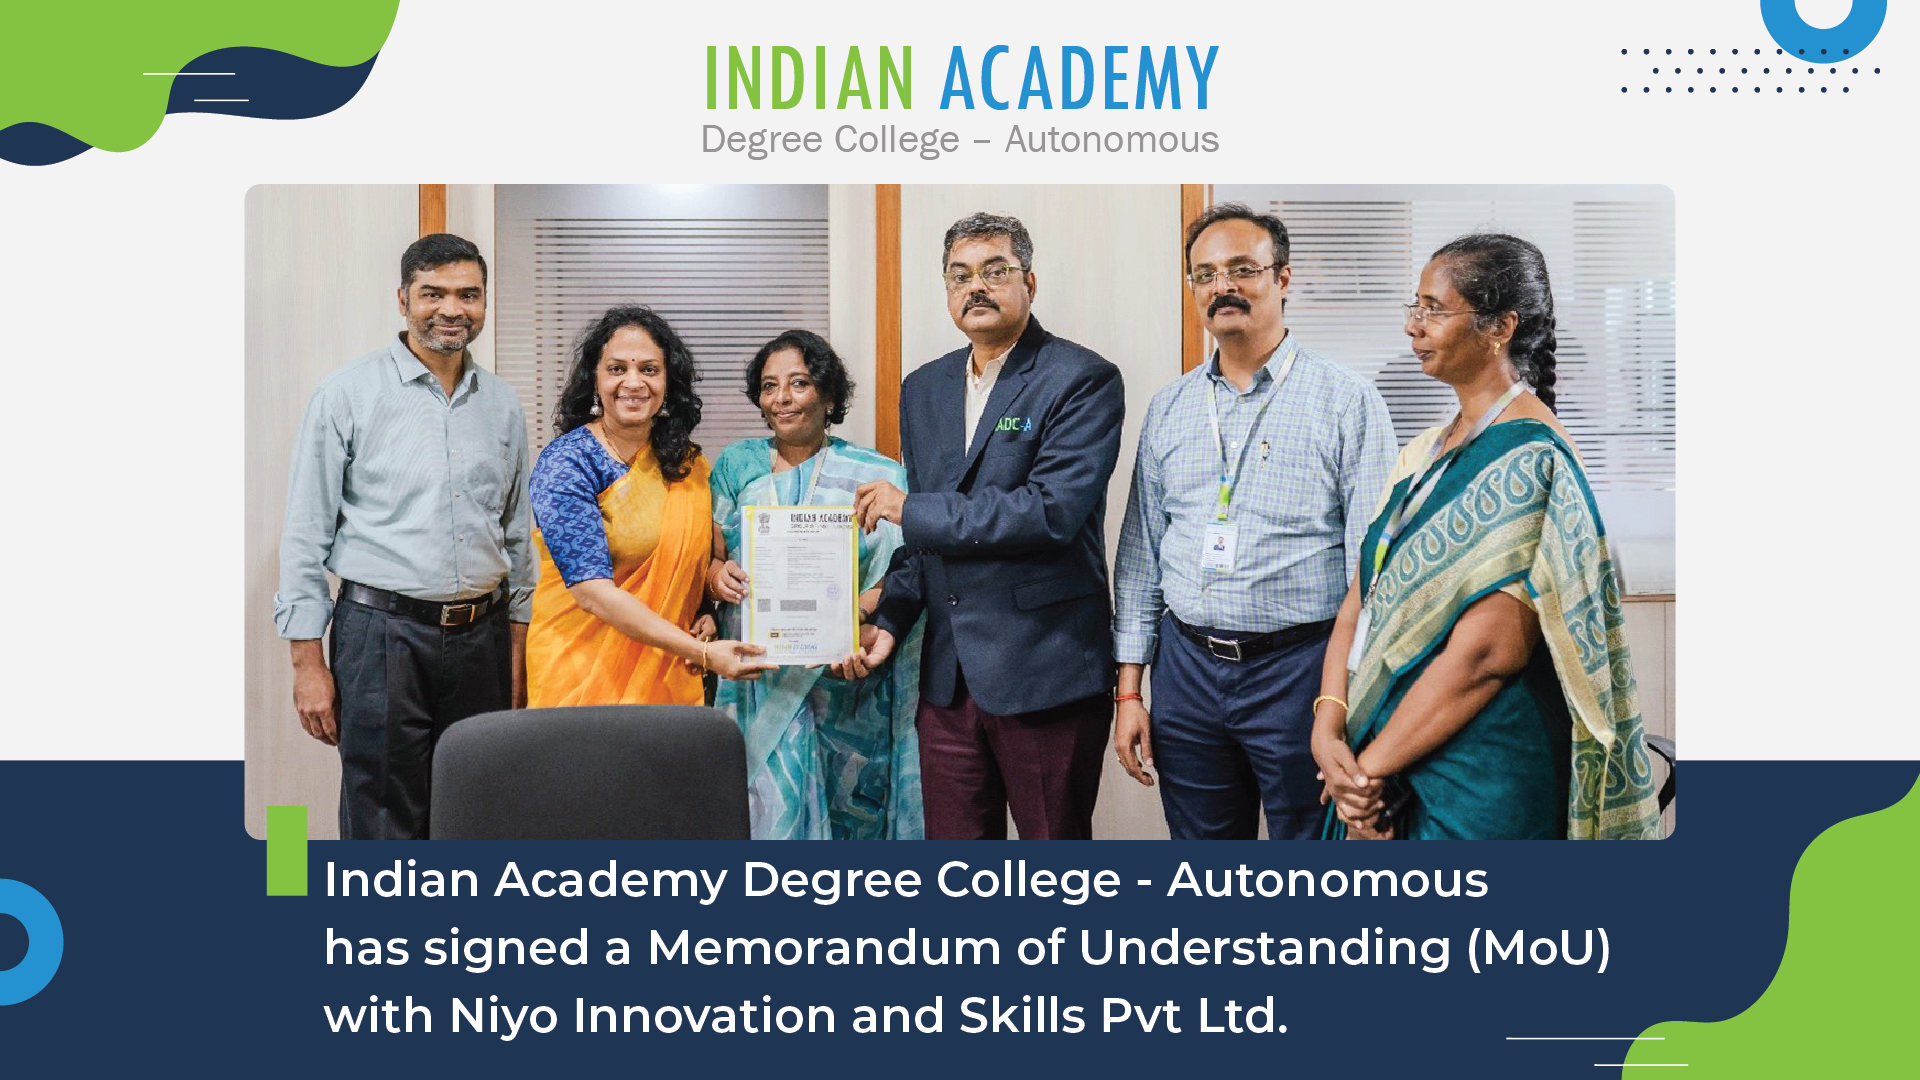 MOU Is Signed With Niyo Innovation and Skills Pvt Ltd.